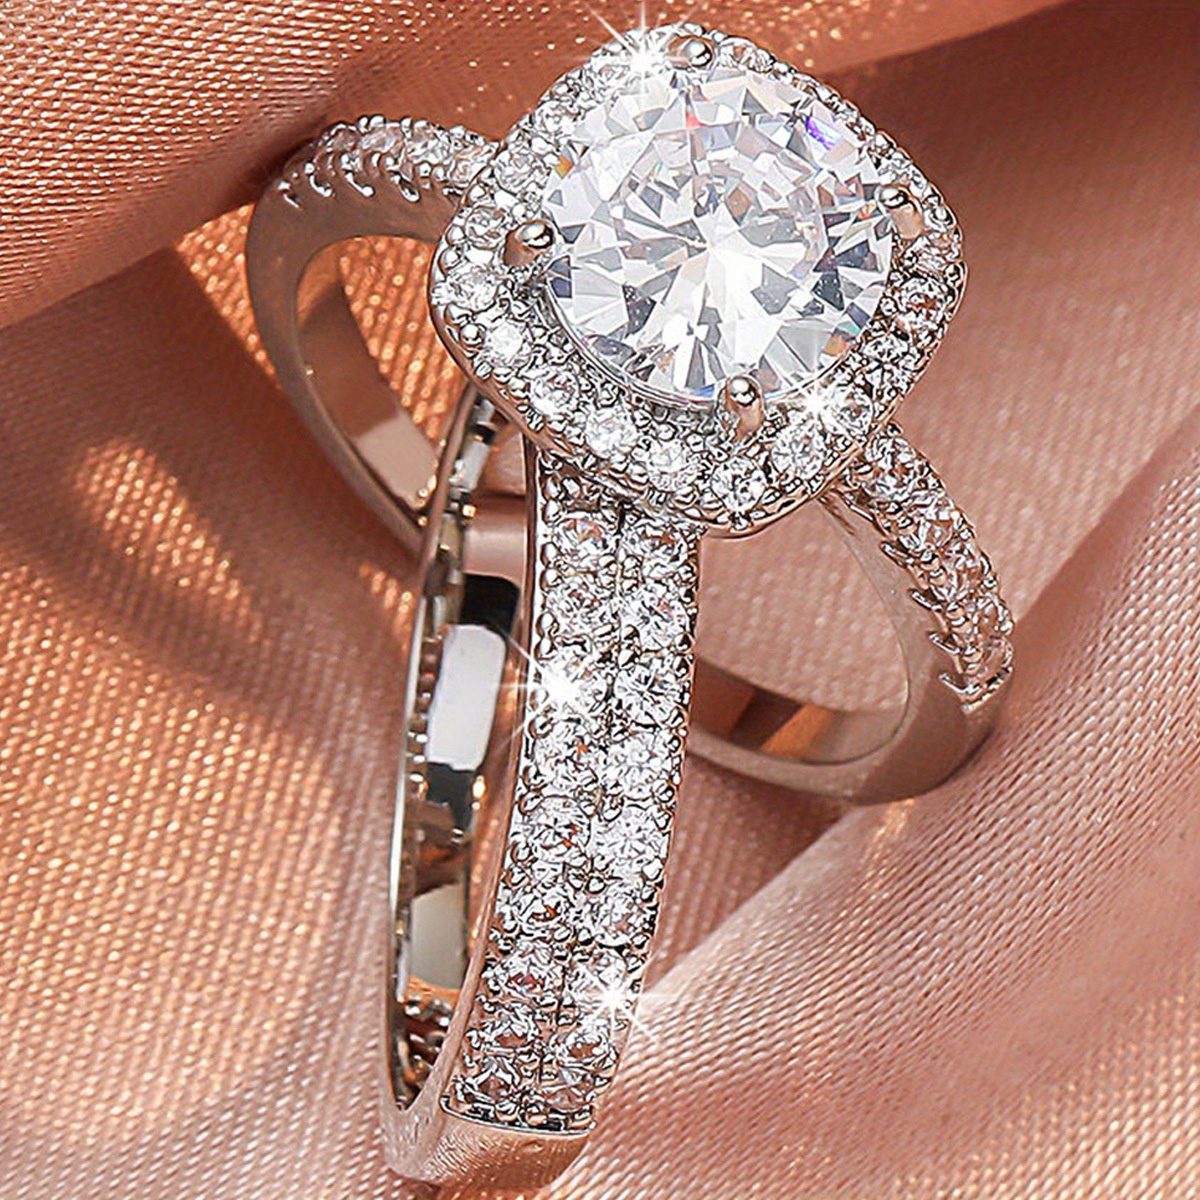 Jewelry for Women Rings Engagement Round Cut Zircons Women Wedding Rings Jewelry Rings for Woman Full Diamond Ladies Ring Cute Ring Pack Trendy